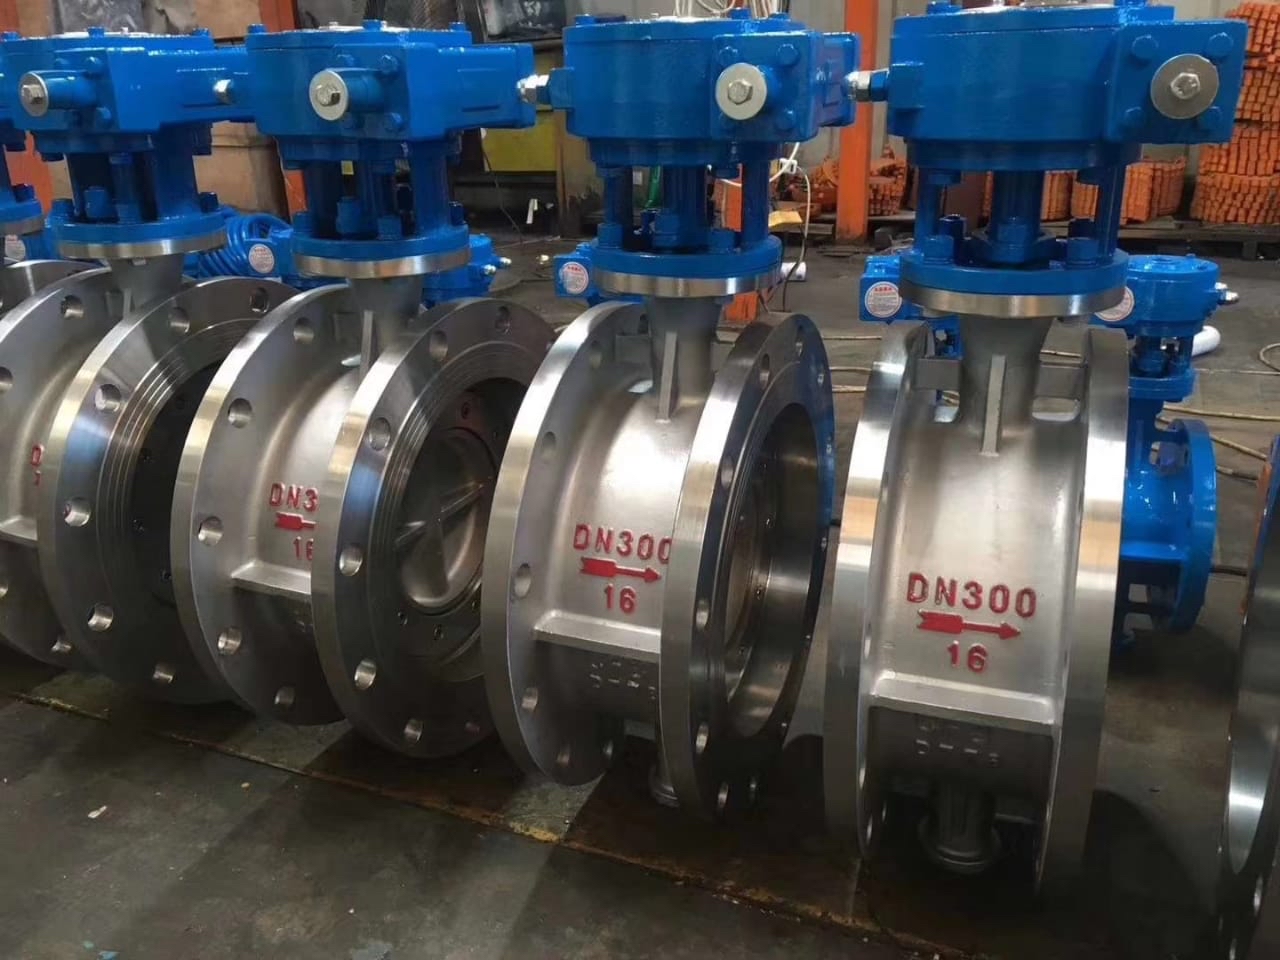 Butterfly Valve Manufacturer in Germany - New York - New York ID1551248